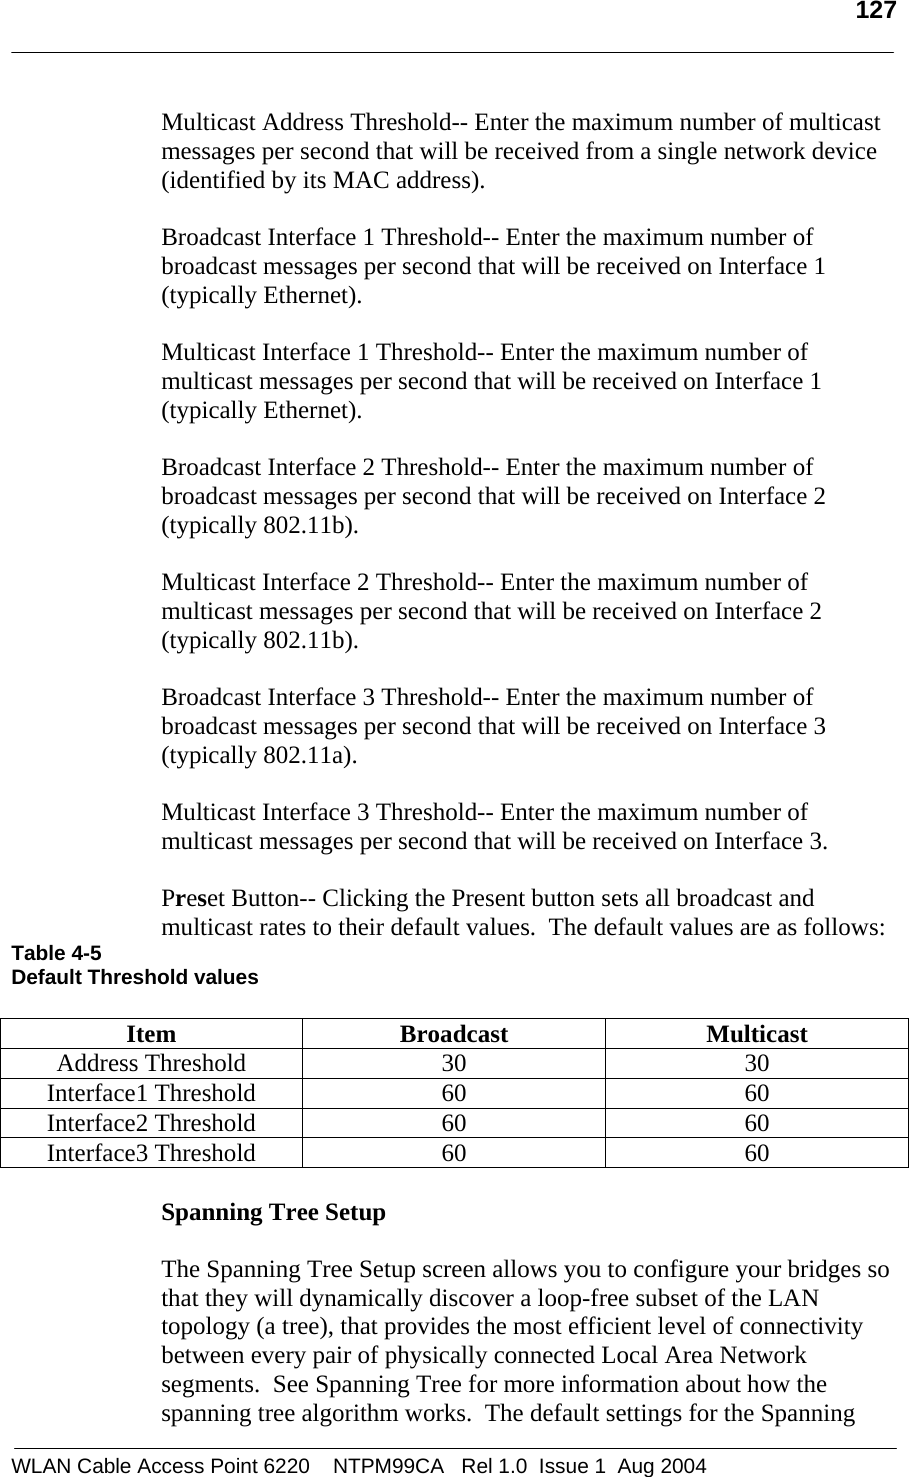   127  Multicast Address Threshold-- Enter the maximum number of multicast messages per second that will be received from a single network device (identified by its MAC address).  Broadcast Interface 1 Threshold-- Enter the maximum number of broadcast messages per second that will be received on Interface 1 (typically Ethernet).  Multicast Interface 1 Threshold-- Enter the maximum number of multicast messages per second that will be received on Interface 1 (typically Ethernet).  Broadcast Interface 2 Threshold-- Enter the maximum number of broadcast messages per second that will be received on Interface 2 (typically 802.11b).  Multicast Interface 2 Threshold-- Enter the maximum number of multicast messages per second that will be received on Interface 2 (typically 802.11b).  Broadcast Interface 3 Threshold-- Enter the maximum number of broadcast messages per second that will be received on Interface 3 (typically 802.11a).  Multicast Interface 3 Threshold-- Enter the maximum number of multicast messages per second that will be received on Interface 3.  Preset Button-- Clicking the Present button sets all broadcast and multicast rates to their default values.  The default values are as follows: Table 4-5 Default Threshold values  Item Broadcast Multicast Address Threshold  30  30 Interface1 Threshold  60  60 Interface2 Threshold  60  60 Interface3 Threshold  60  60  Spanning Tree Setup  The Spanning Tree Setup screen allows you to configure your bridges so that they will dynamically discover a loop-free subset of the LAN topology (a tree), that provides the most efficient level of connectivity between every pair of physically connected Local Area Network segments.  See Spanning Tree for more information about how the spanning tree algorithm works.  The default settings for the Spanning WLAN Cable Access Point 6220    NTPM99CA   Rel 1.0  Issue 1  Aug 2004 